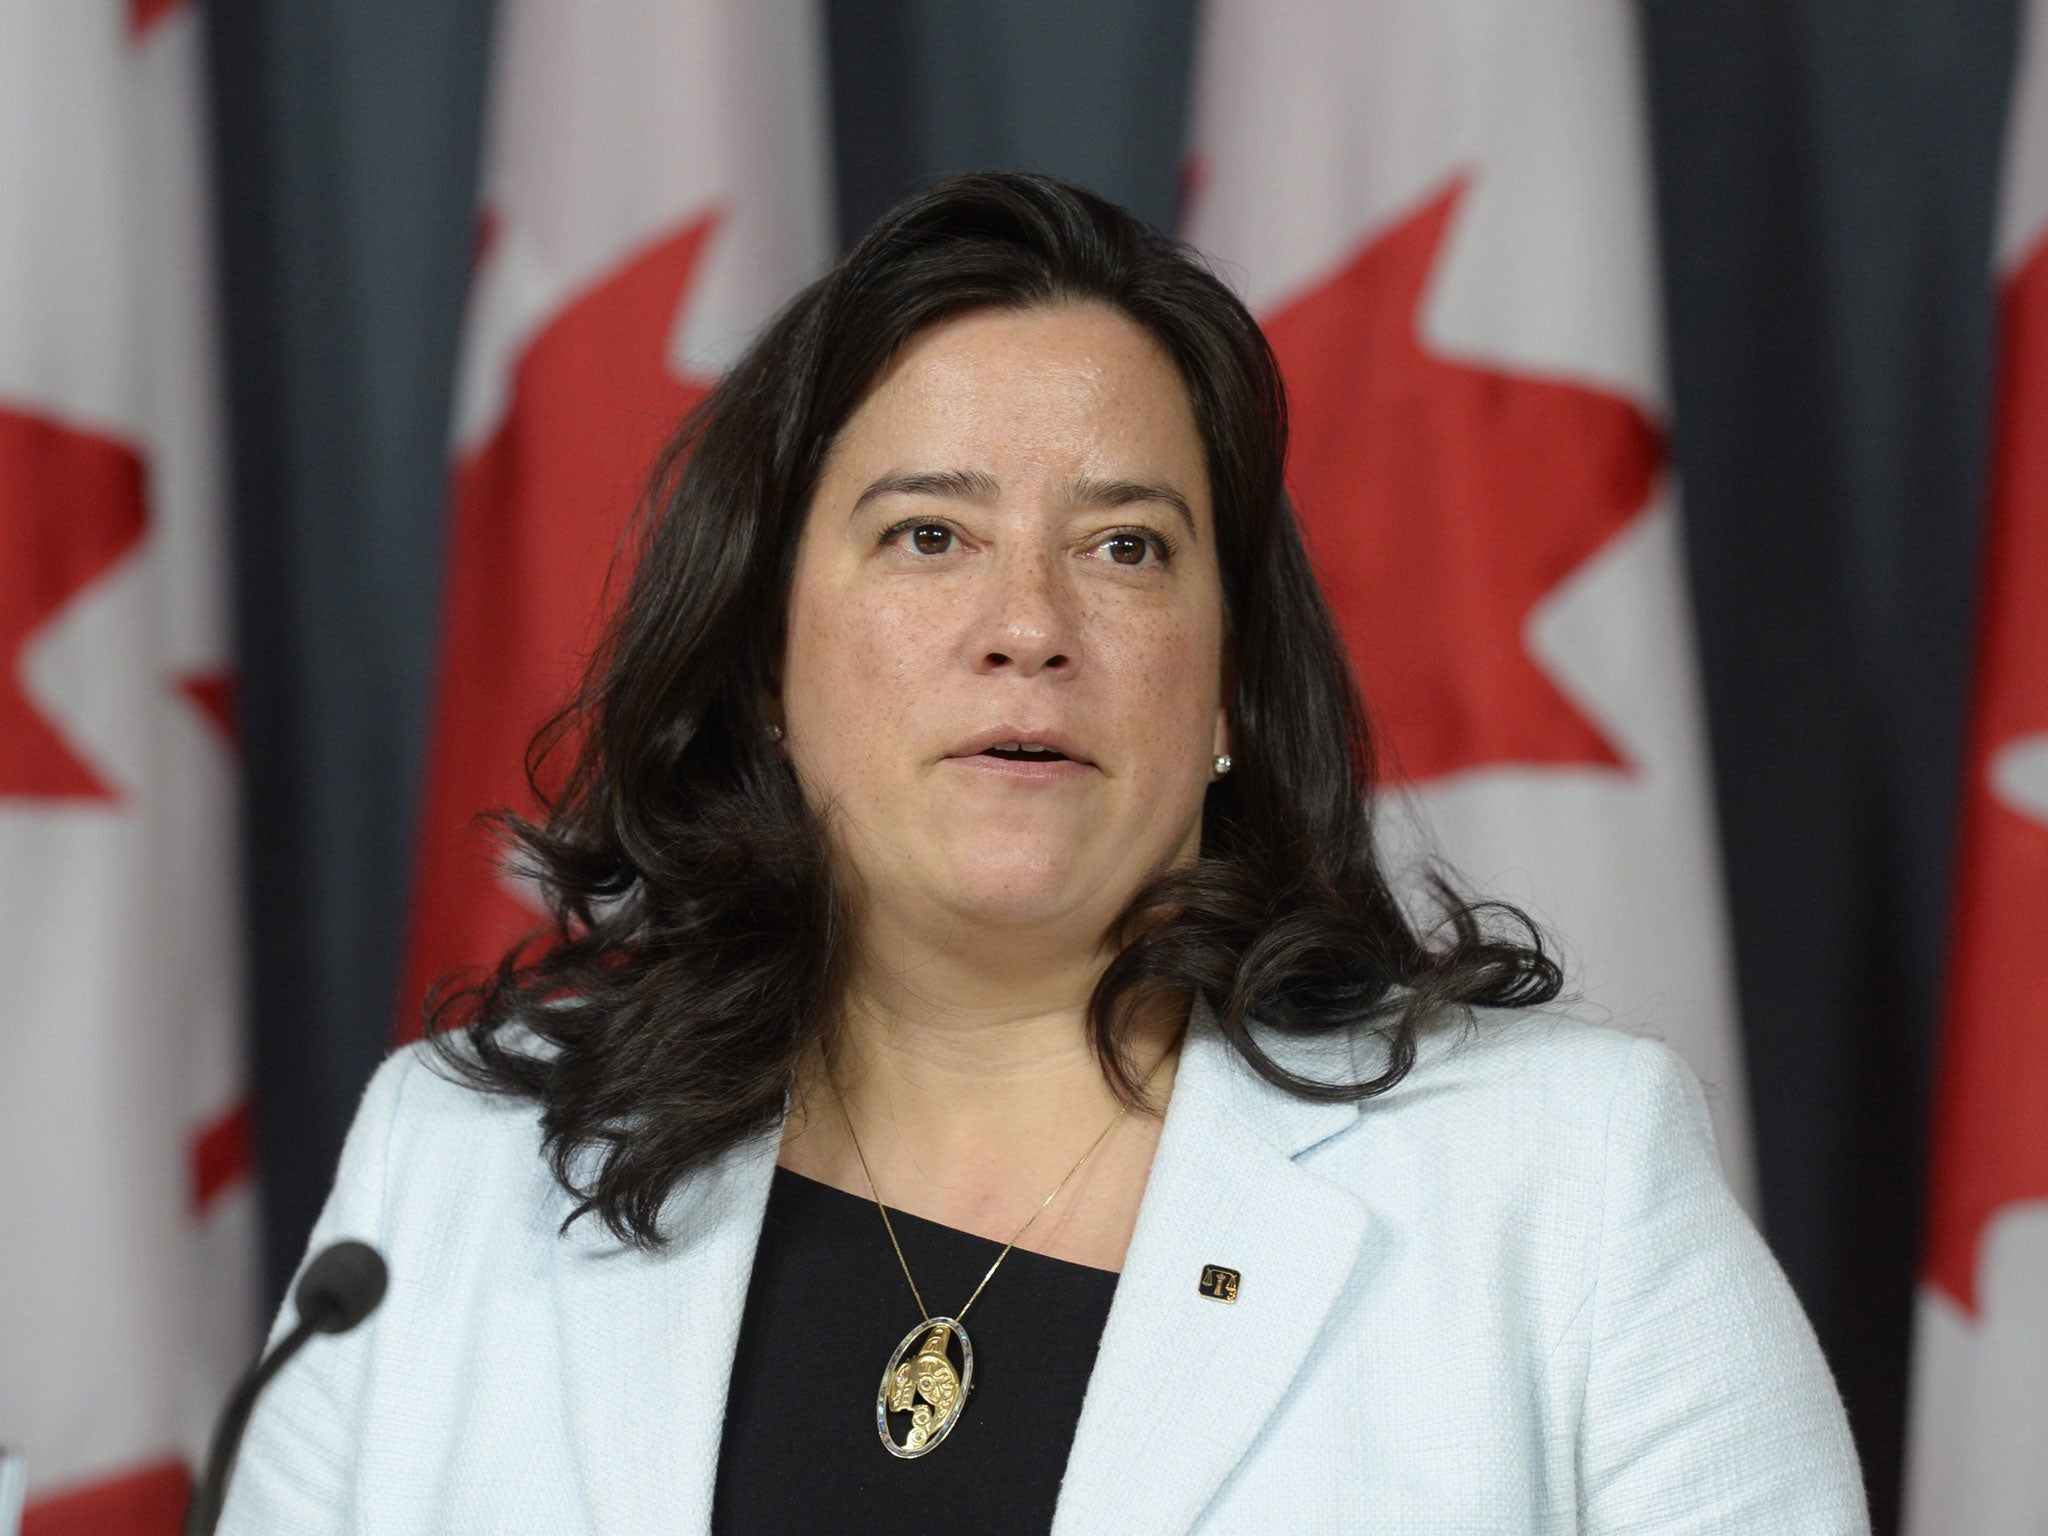 Canada's Justice Minister Jody Wilson-Raybould speaks at a news conference in Ottawa about introducing a new assisted suicide law that will only apply to Canadians and residents